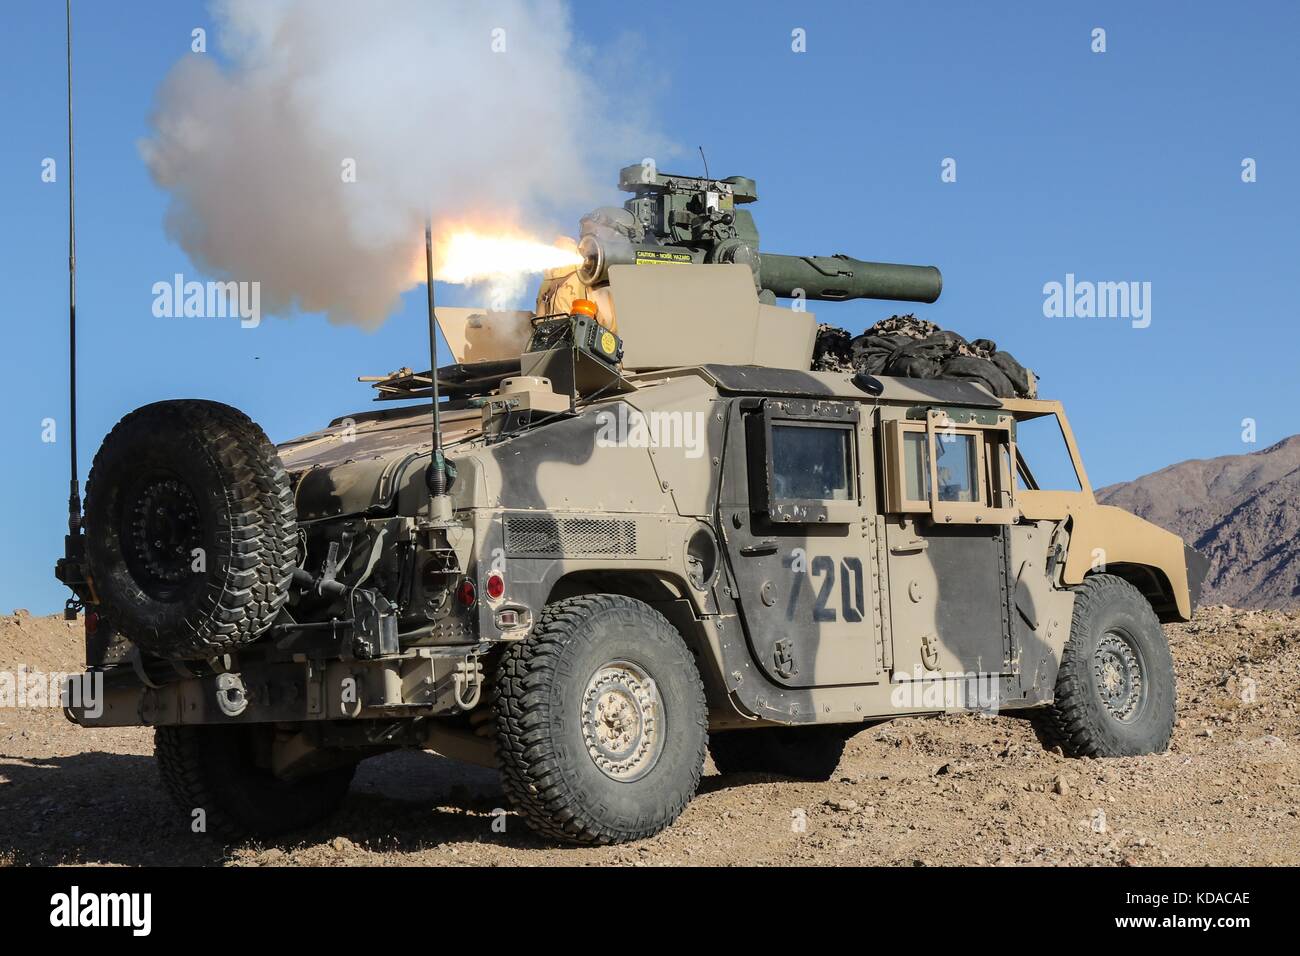 A U.S. Army Humvee tactical vehicle fires a simulated tube-launched, optically-tracked, wire-guided missile during an attack training scenario at the Fort Irwin National Training Center May 7, 2017 in Fort Irwin, California. Stock Photo